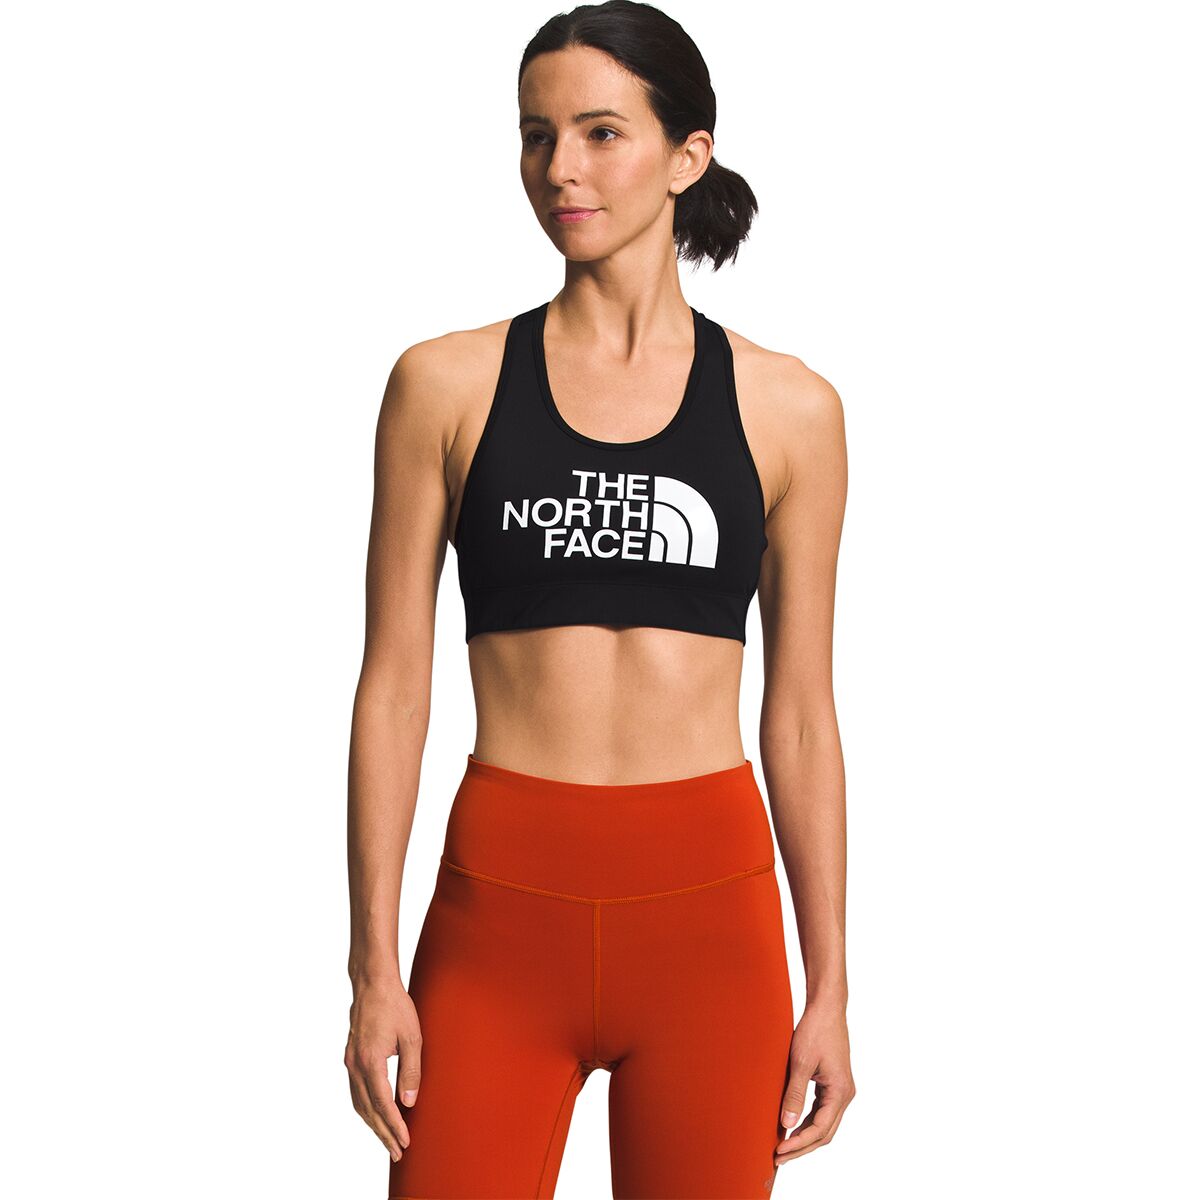 The North Face Performance Essential Bra - Women's